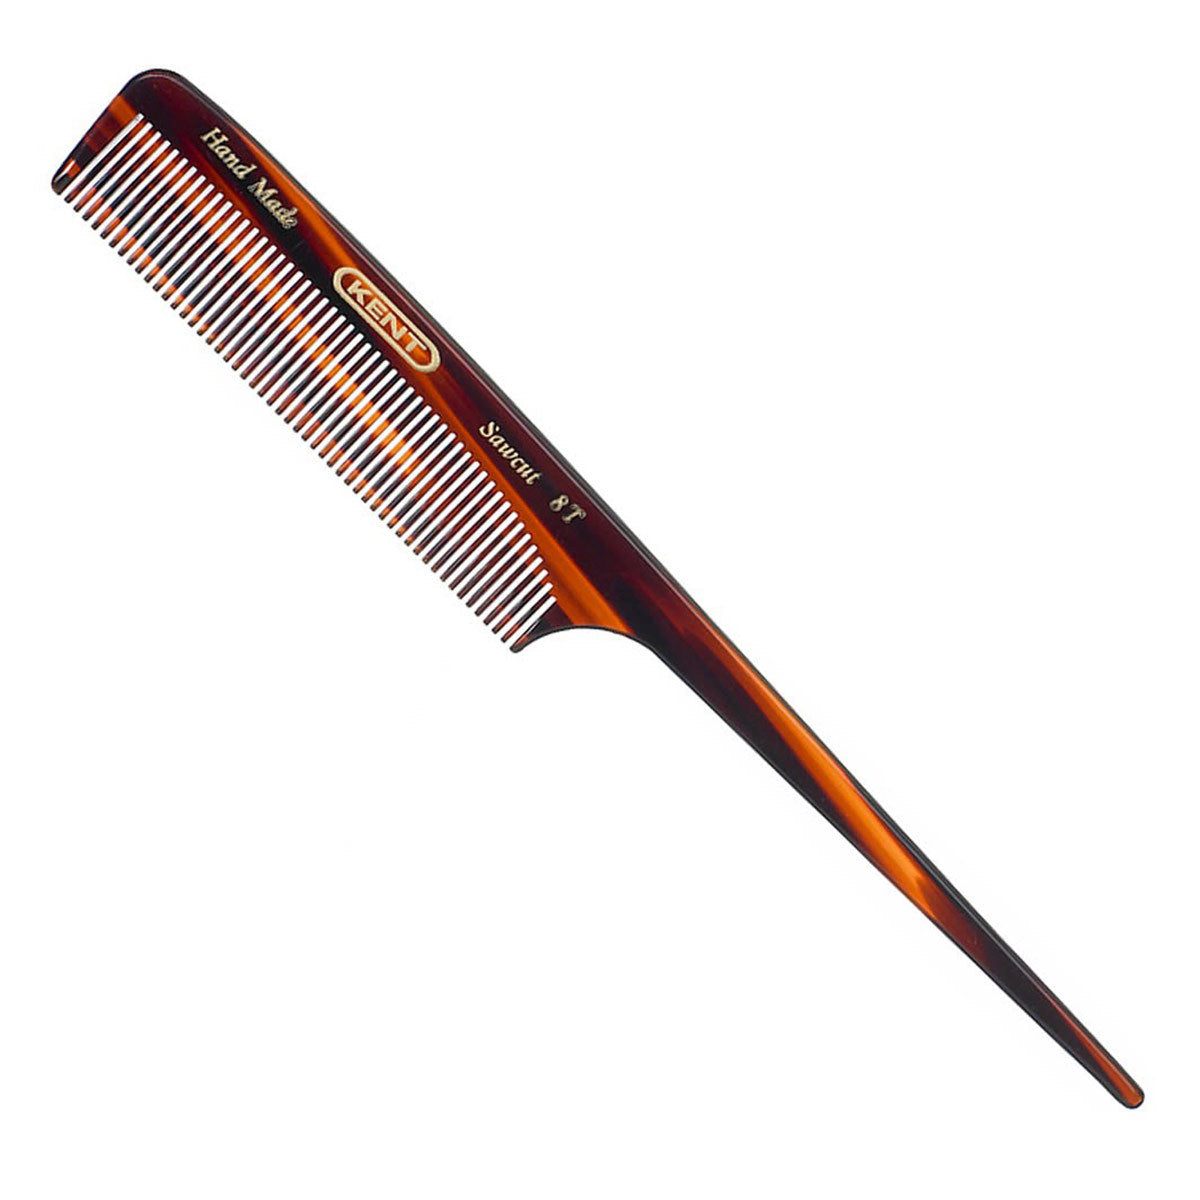 Primary image of 197mm Fine Tail Comb 8T